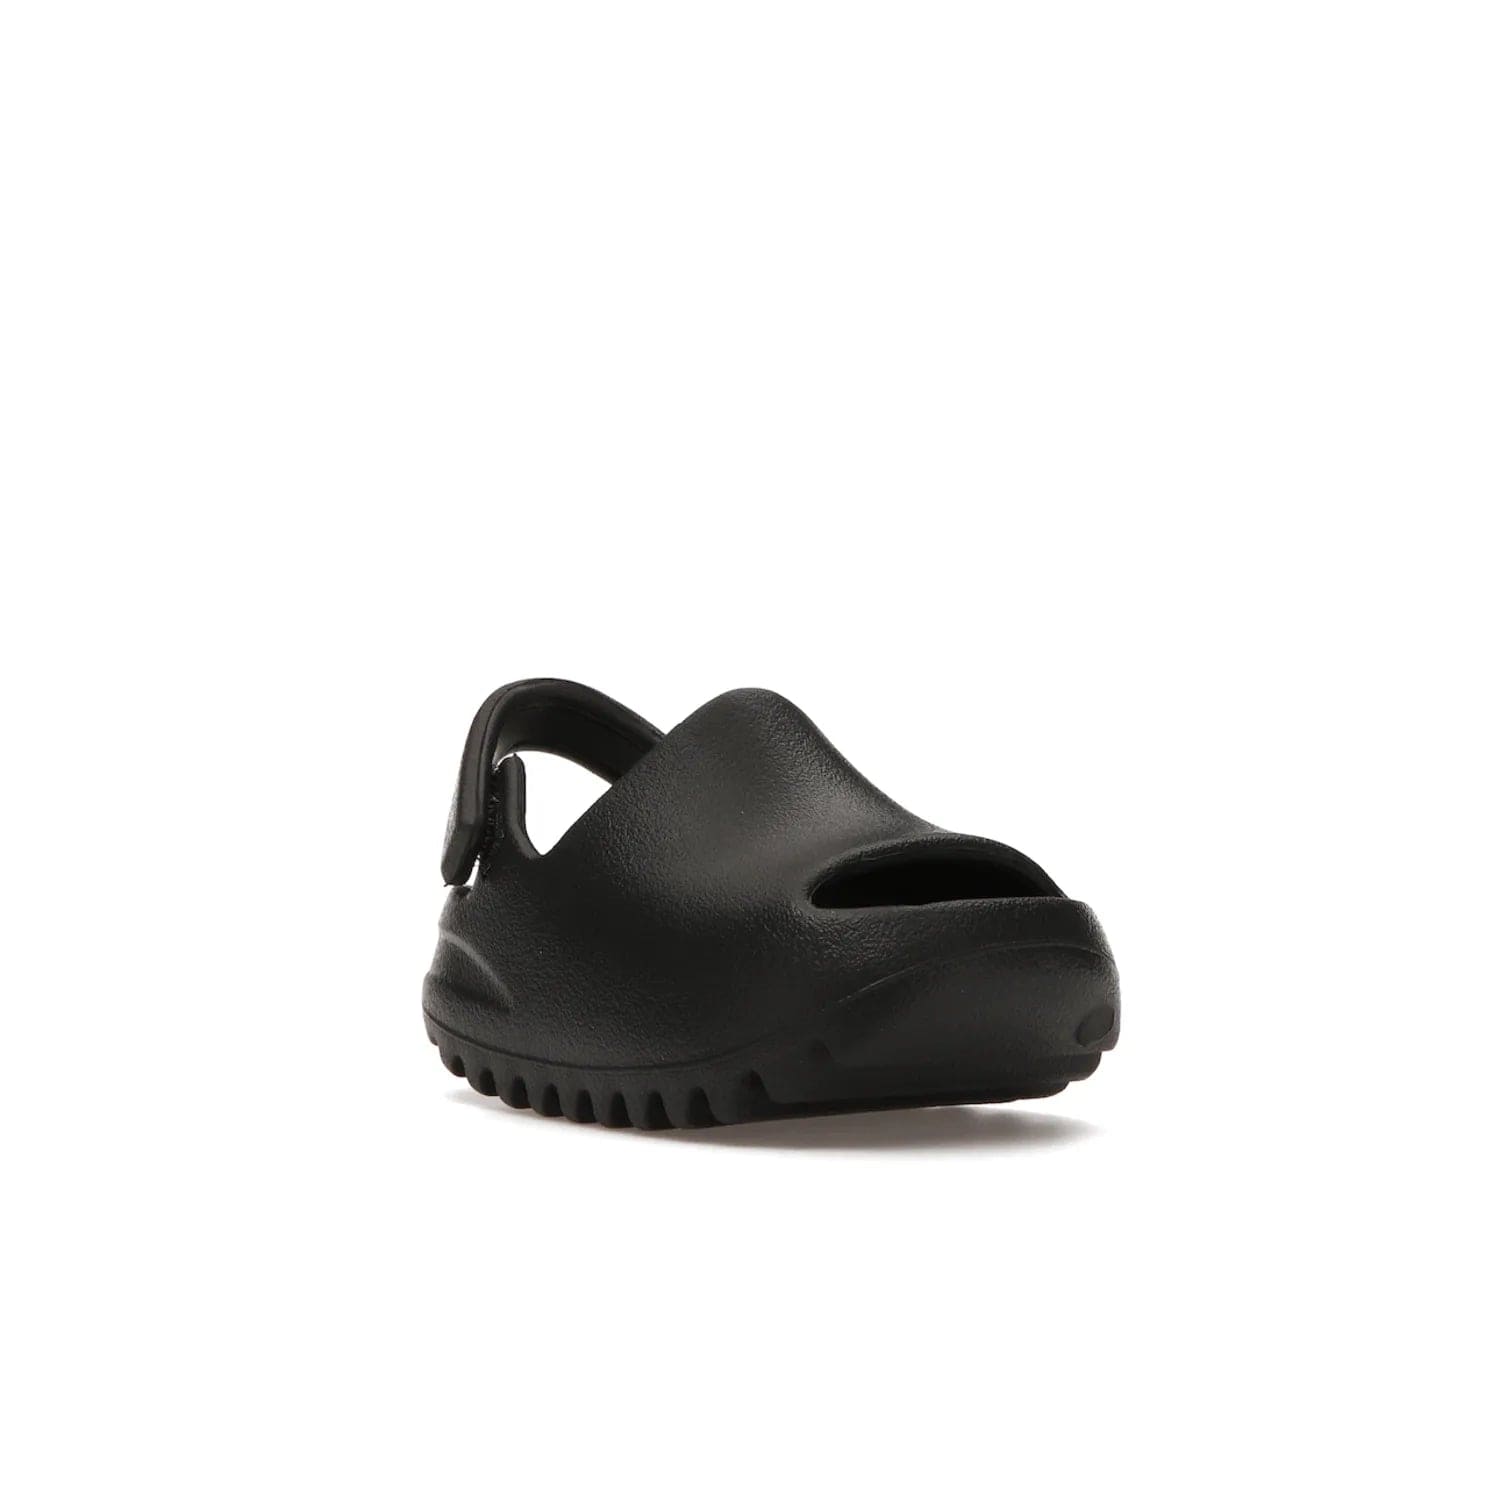 adidas Yeezy Slide Onyx (Infants) - Image 6 - Only at www.BallersClubKickz.com - The Adidas Yeezy Slide Onyx (Infant) is a classic silhouette with unique features and durable EVA foam. Released in May 2021 with a starting price of $70, it's no wonder it quickly gained popularity with its cool, minimalist look.